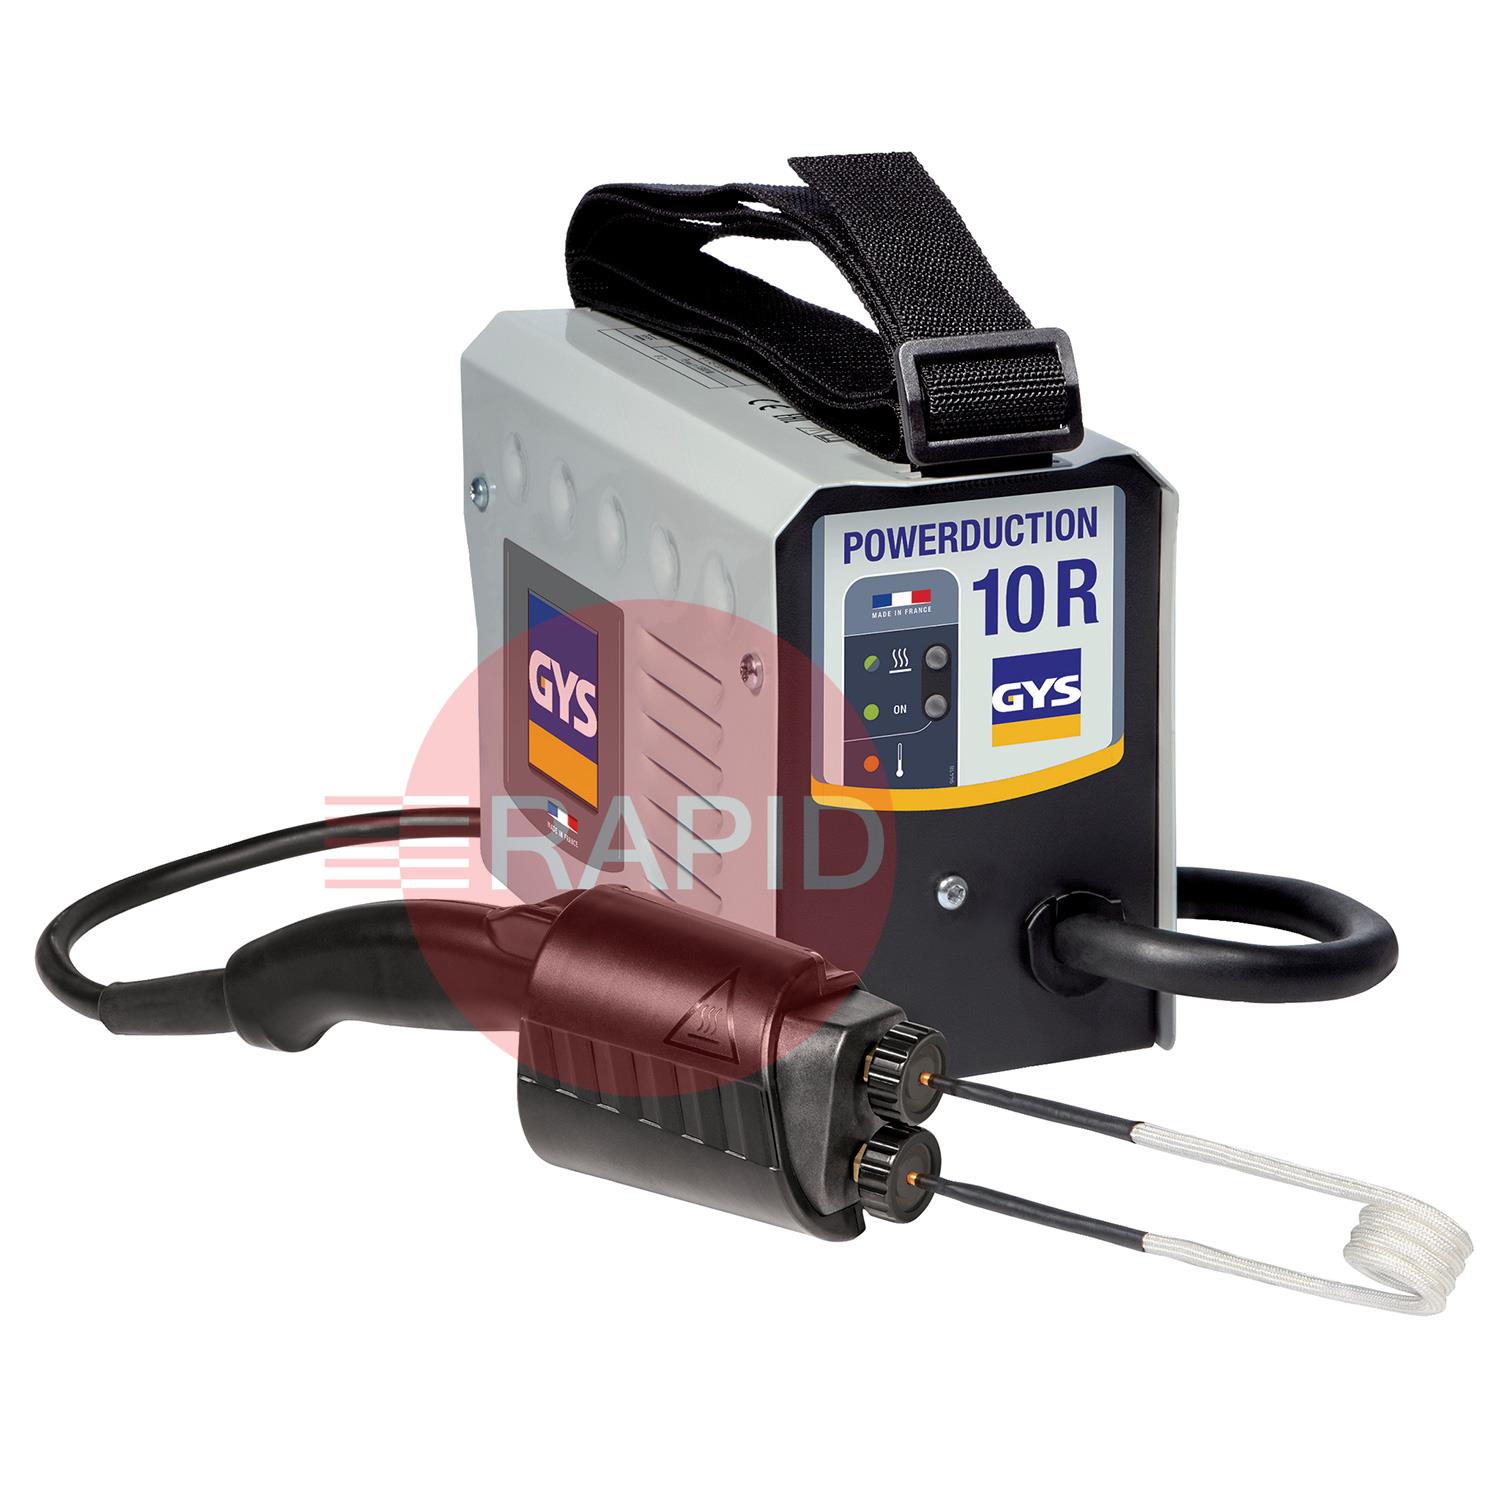 068643  GYS Powerduction 10R Induction Heater, UK Version - 230v